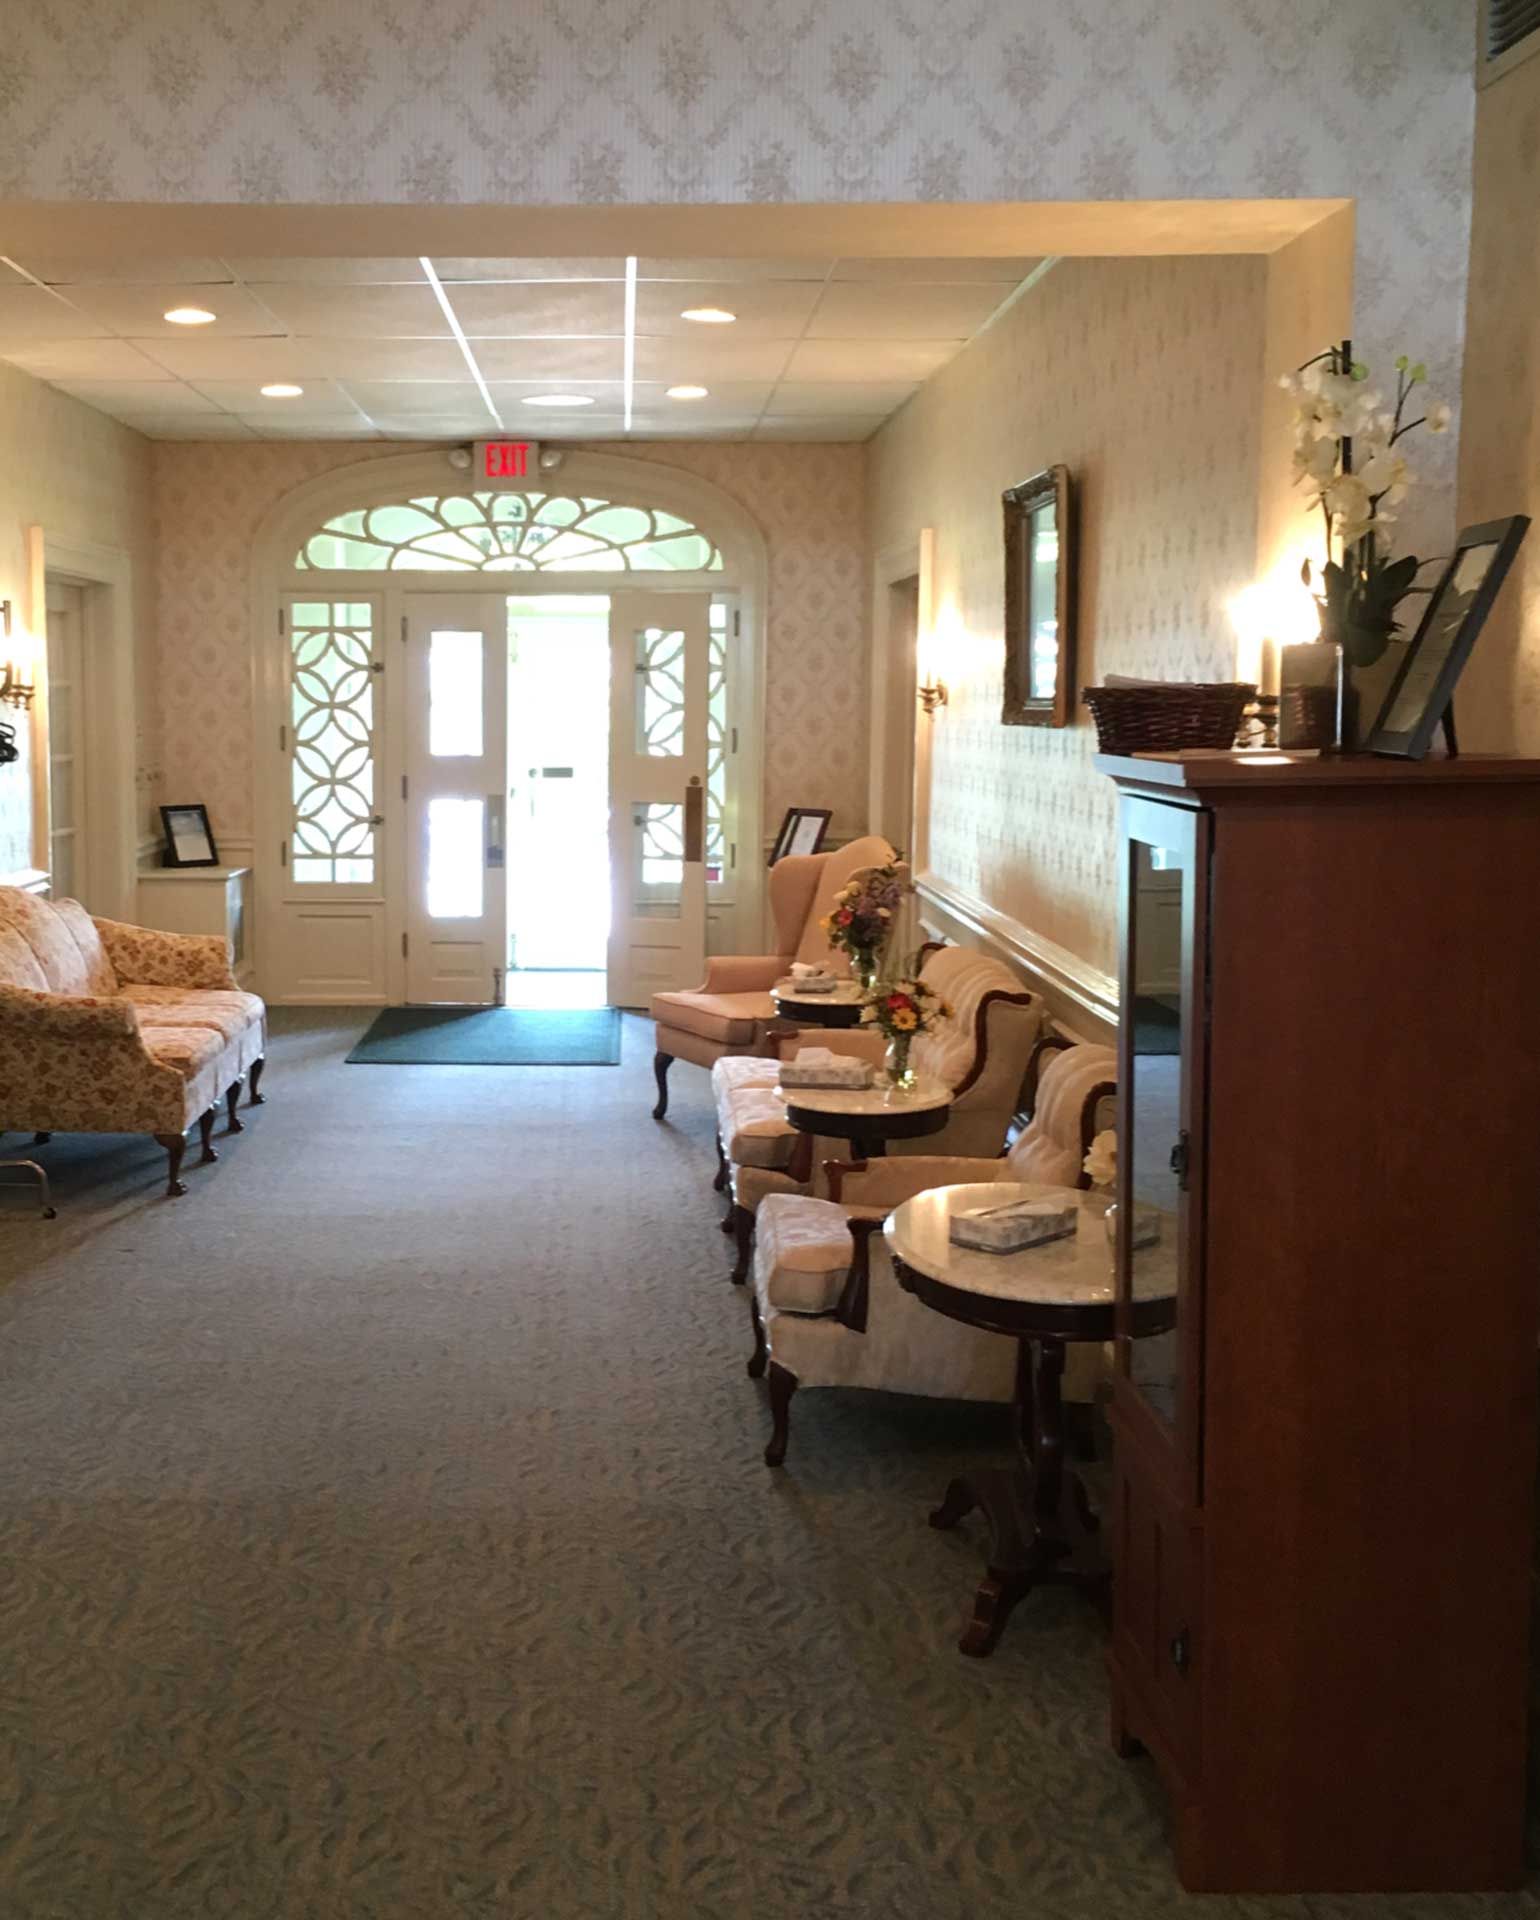 Inside Weber Funeral Home at Hamilton in Lehigh Valley, PA